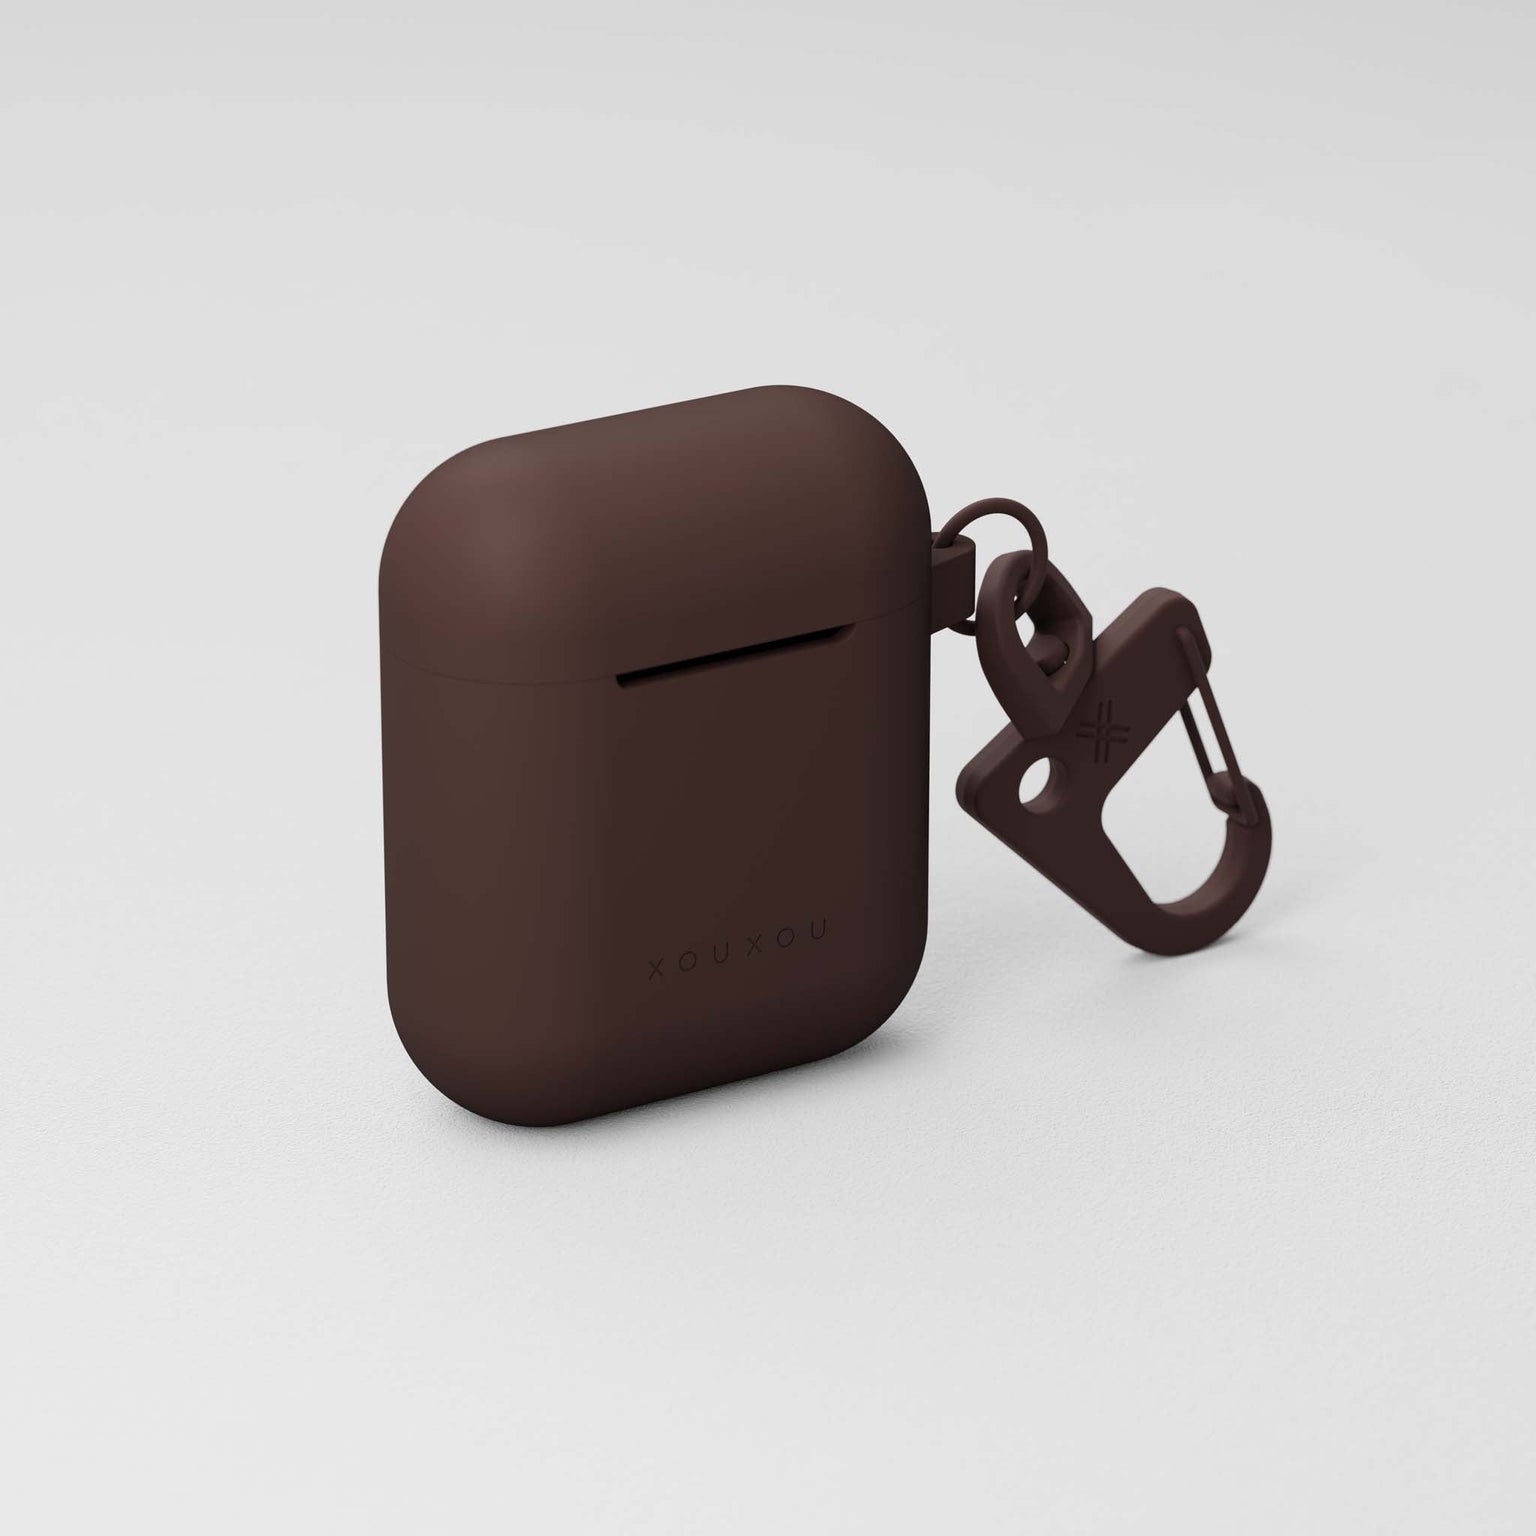 Apple AirPods 1st generation case in Earth Brown silicone | XOUXOU